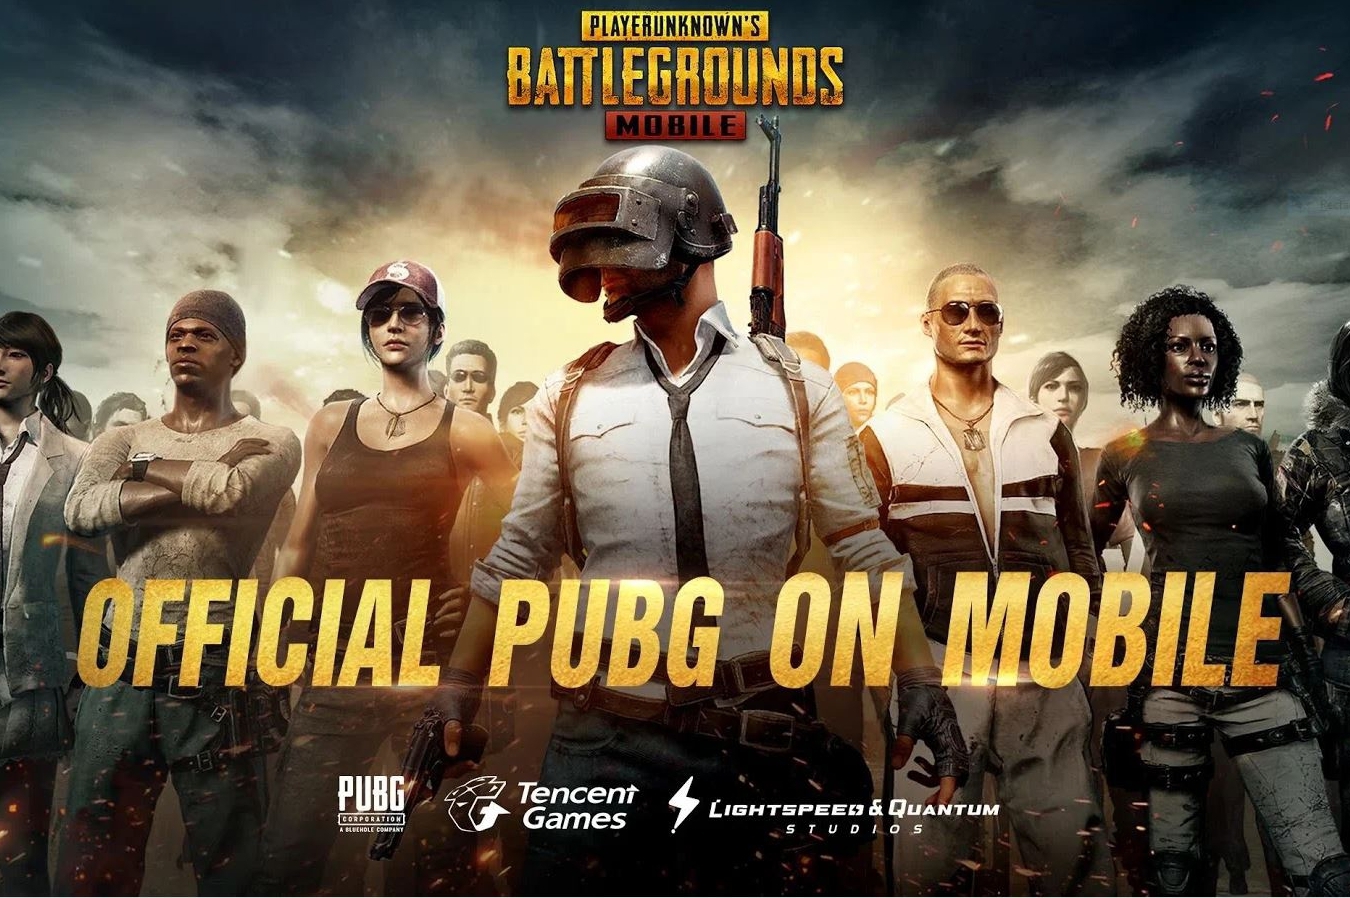 how big is the player unknown battlegrounds download